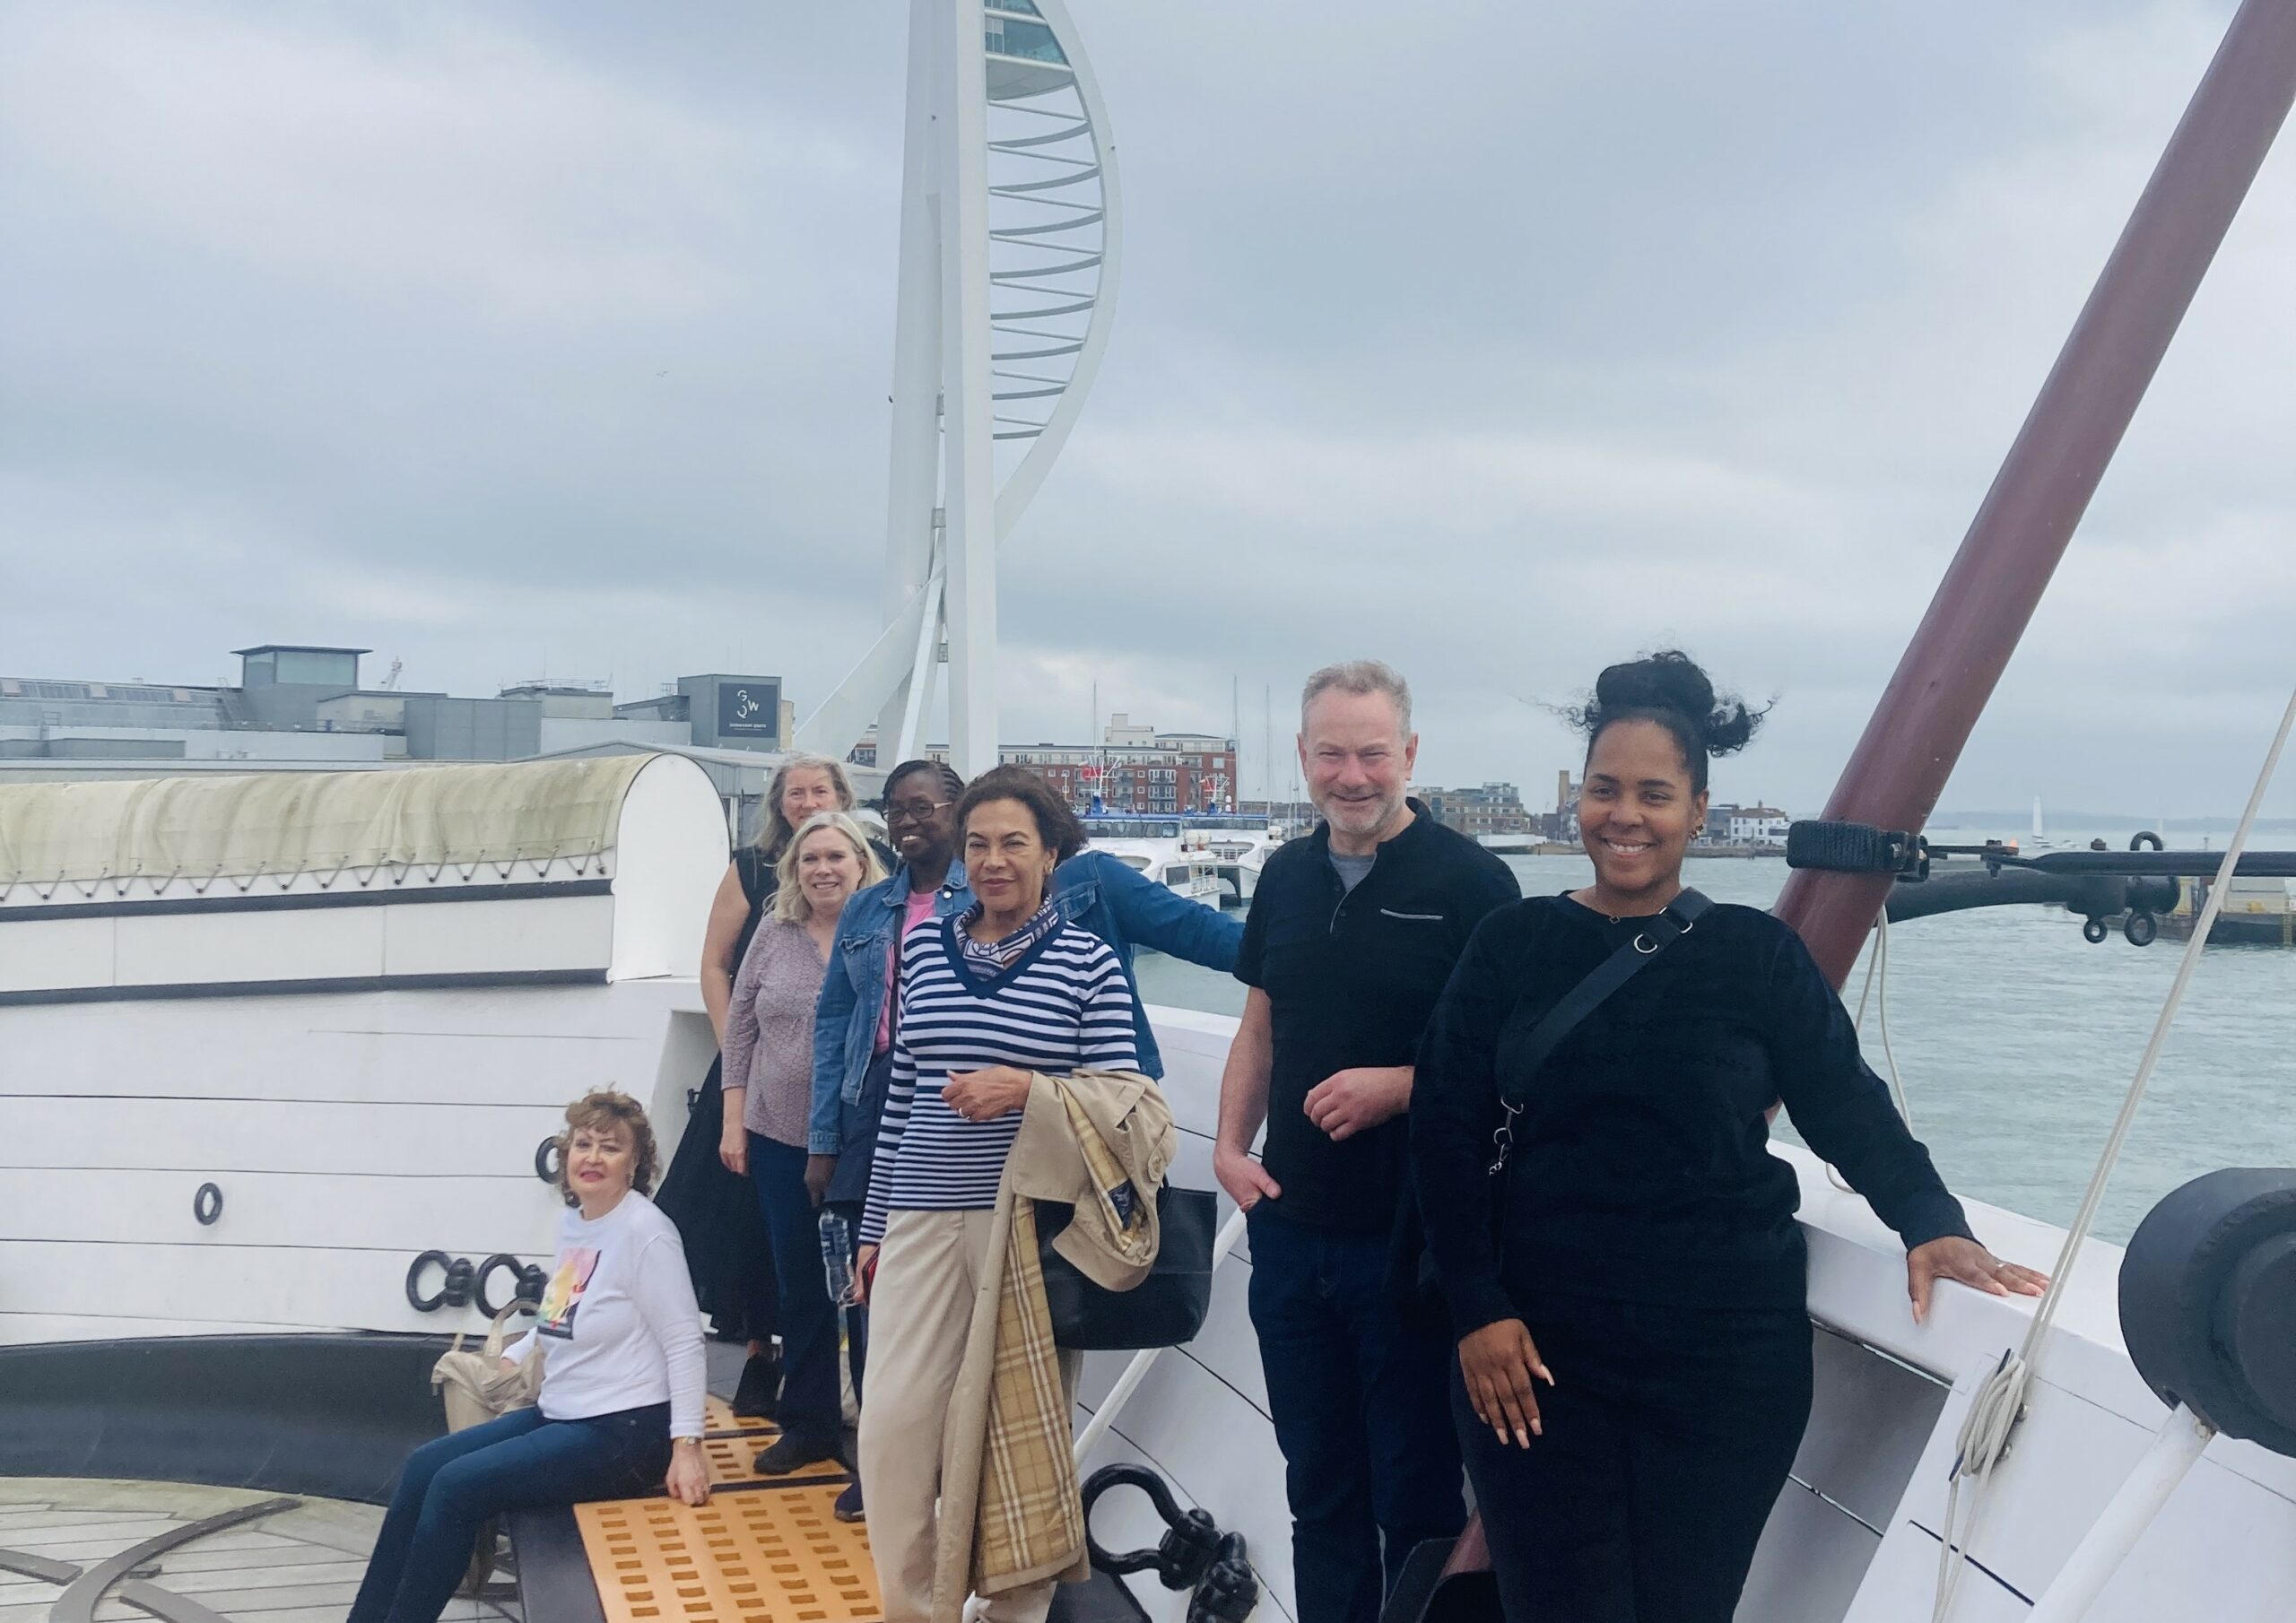 fam trip to Portsmouth onboard HMS Warrior